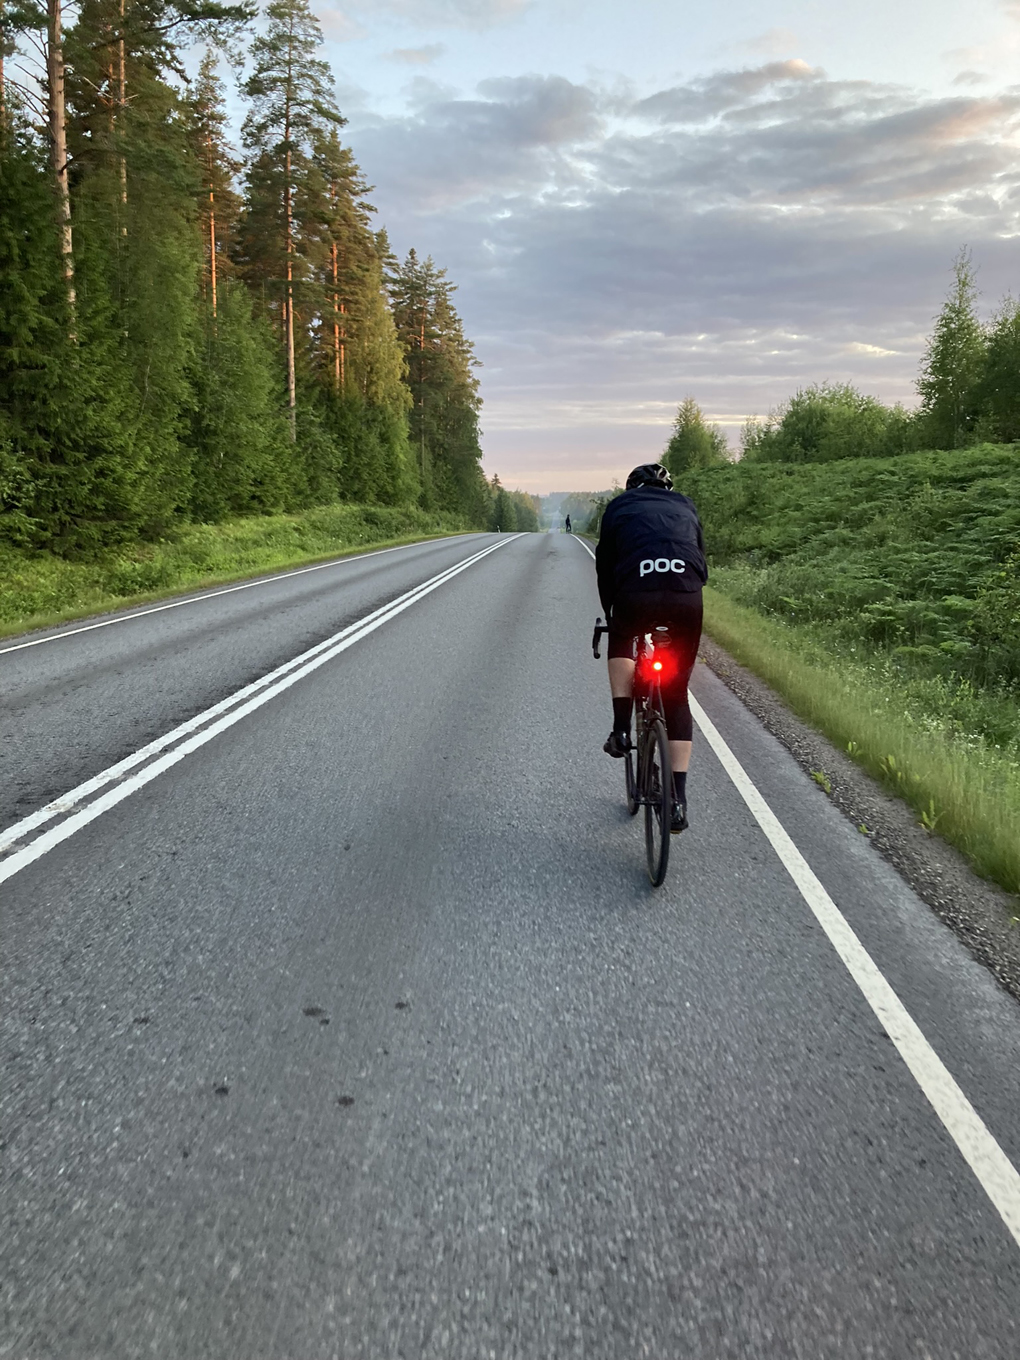 A man cycling on a road.